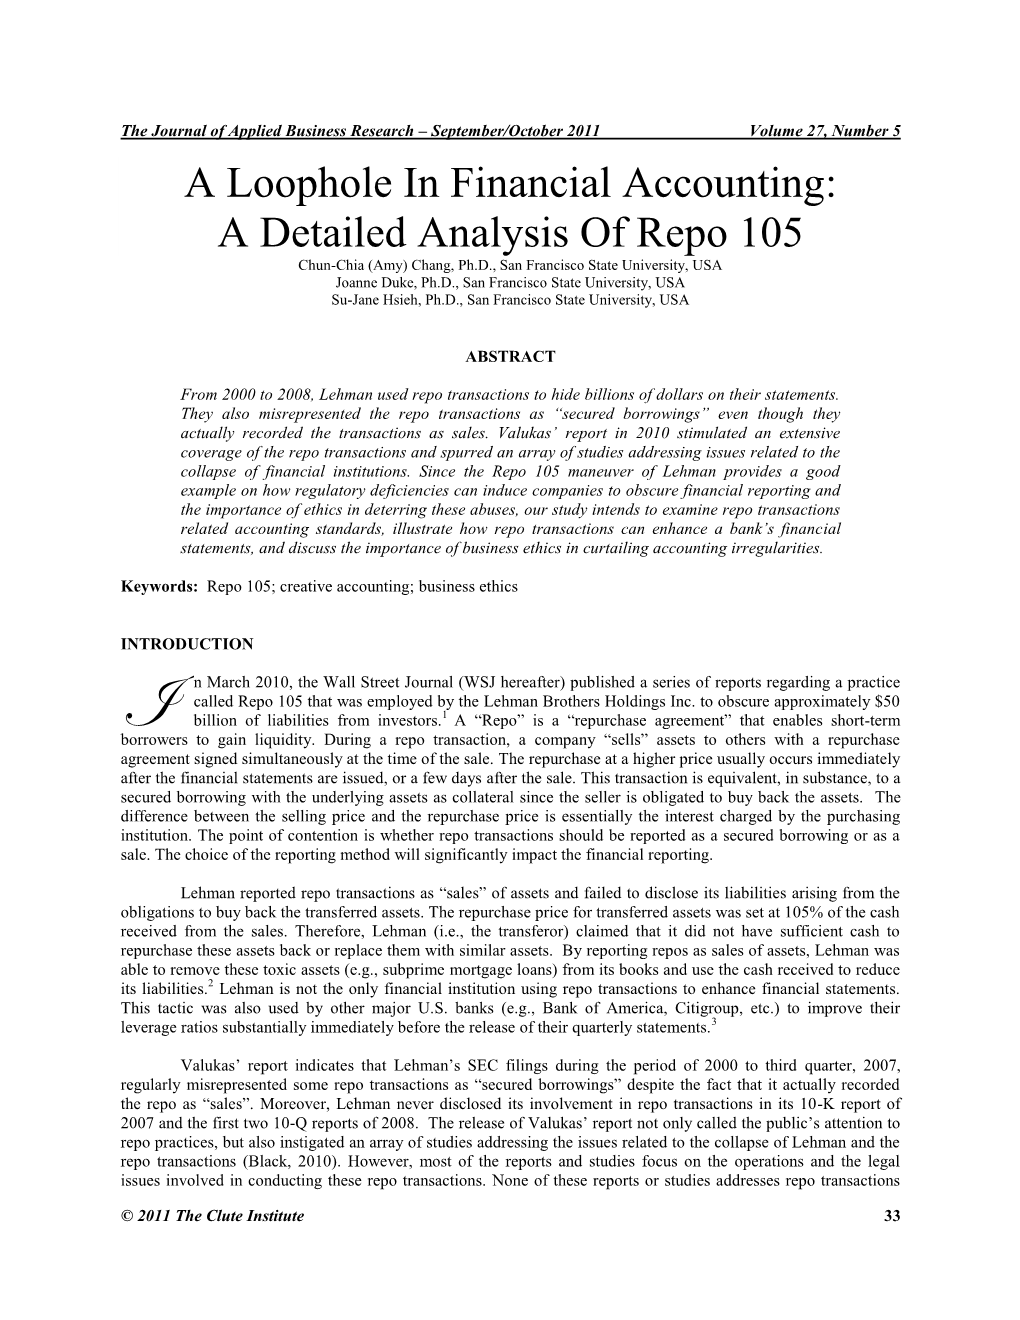 A Loophole in Financial Accounting: a Detailed Analysis of Repo